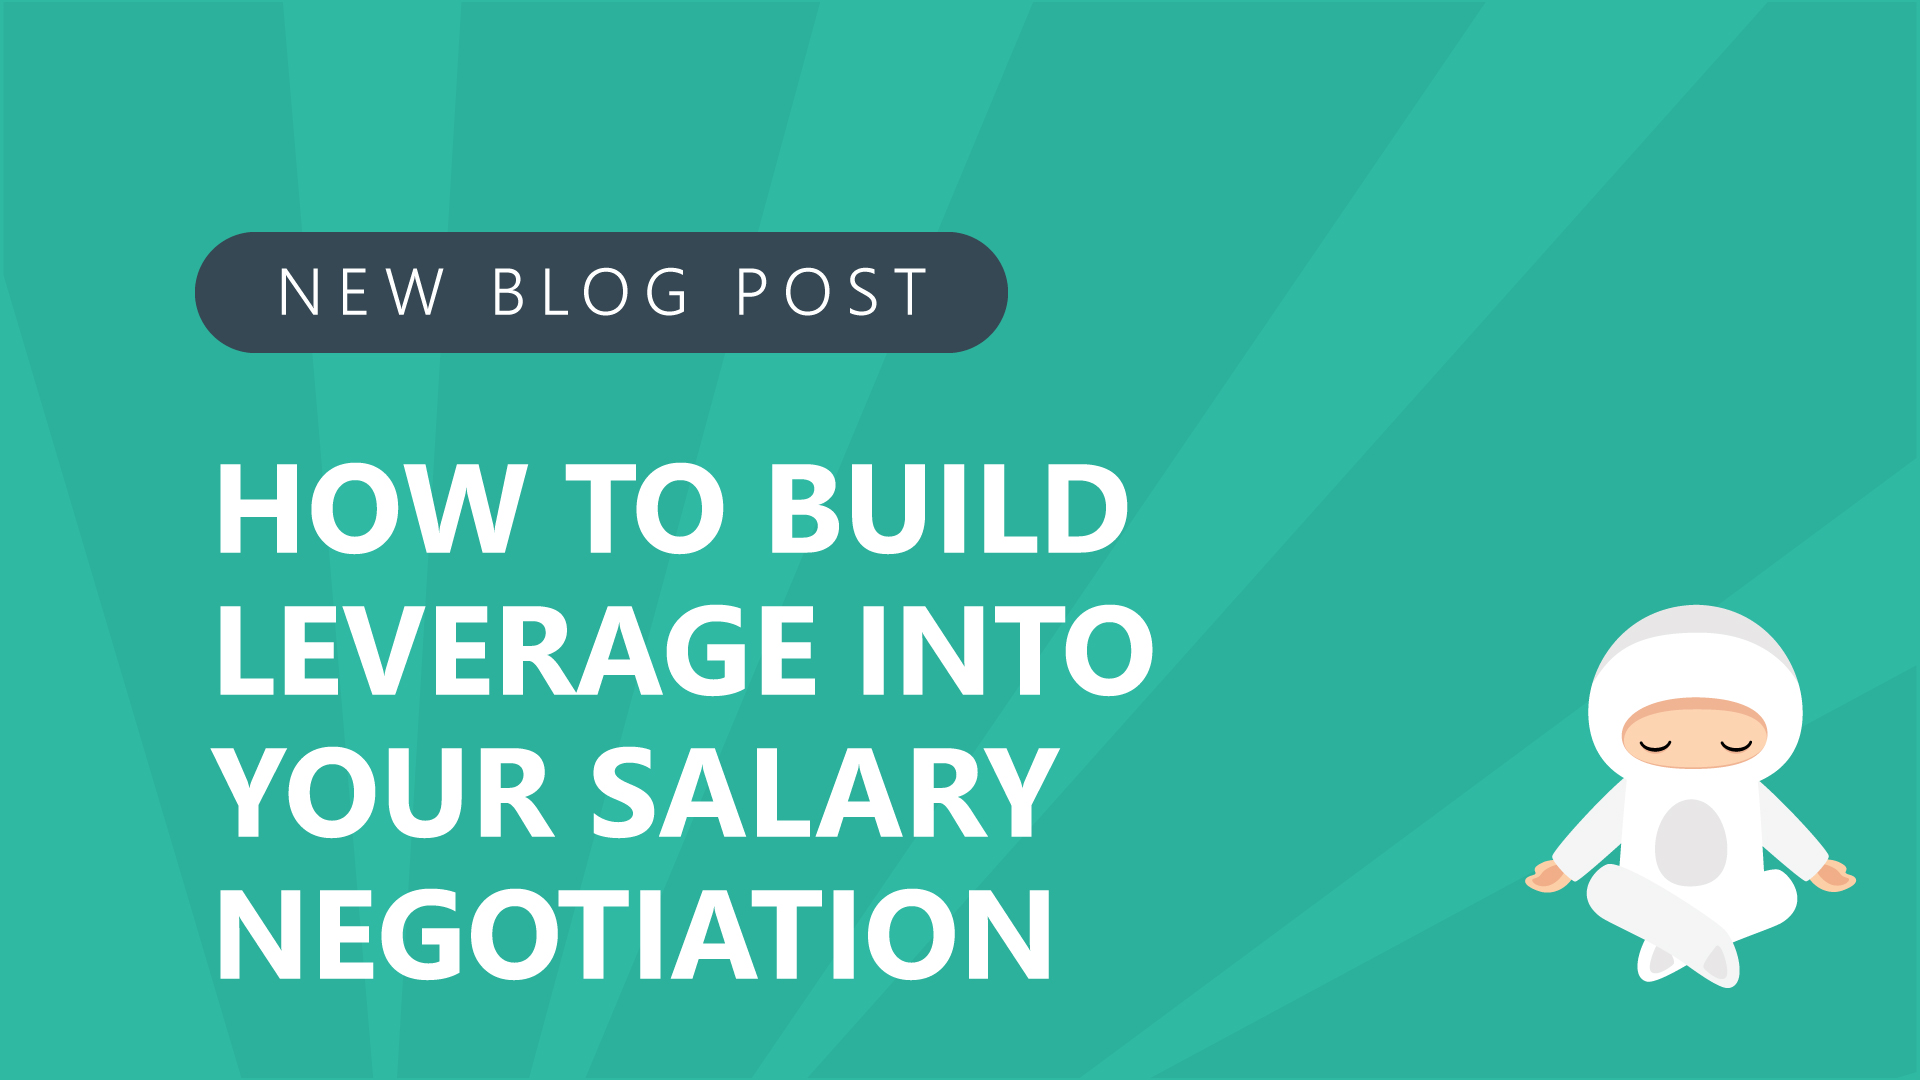 15-How-to-Build-Leverage-into-Your-Salary-Negotiation.jpg